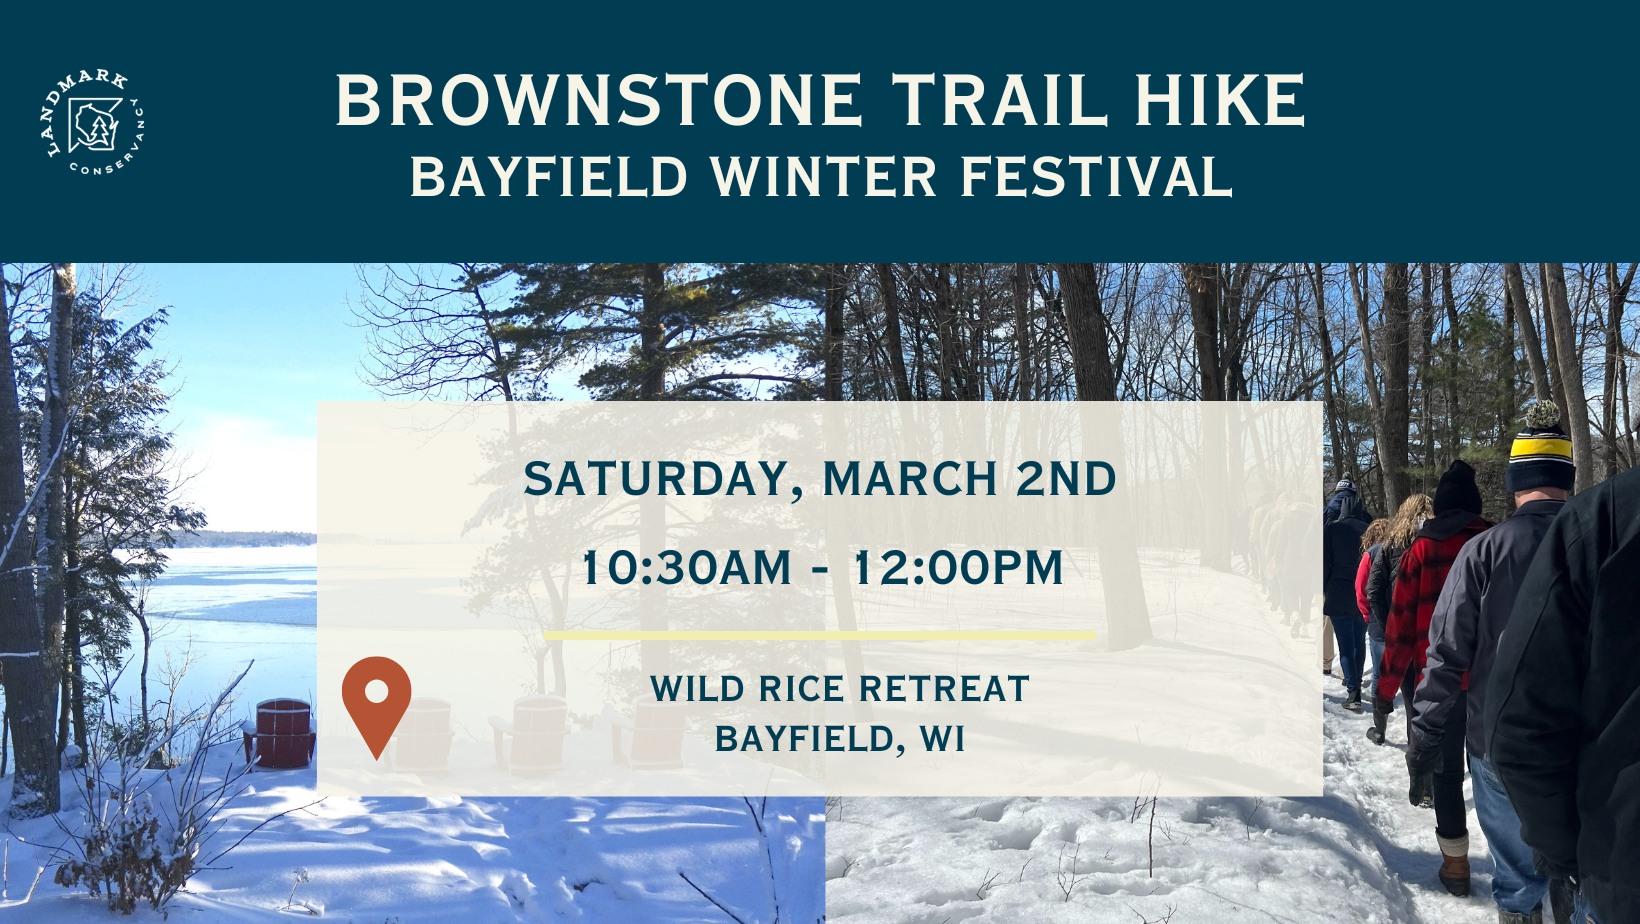 Promo for Brownstone Trail Hike with two winter photos overlaid with text about the hike.